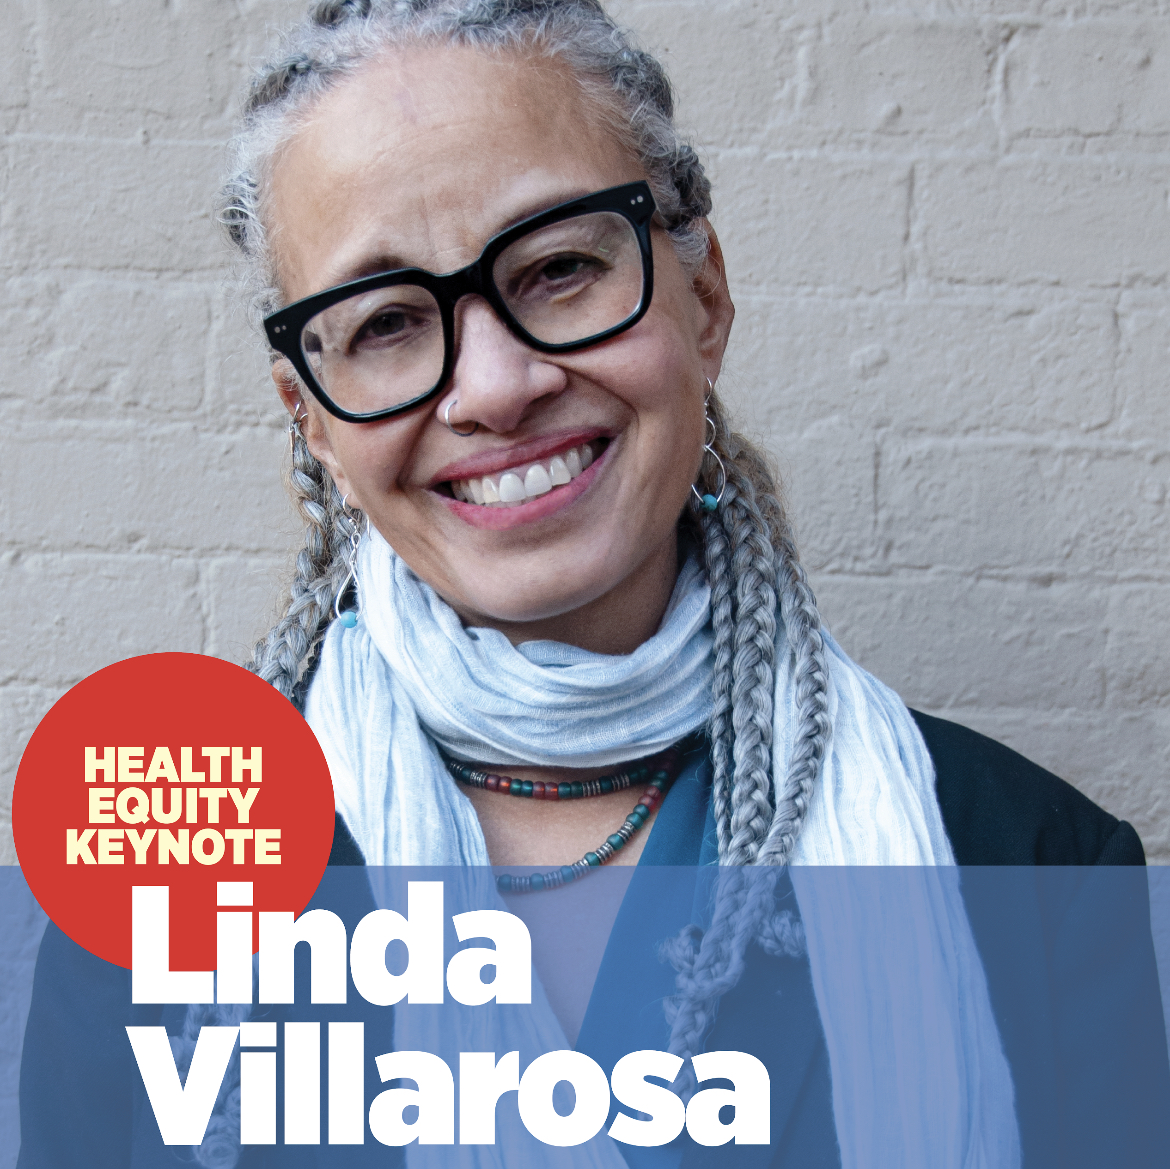 Happening now - Linda Villarosa is opening day two with our 2023 Health Equity keynote. Villarosa is an author, educator and New York Times Magazine contributing writer covering race, inequality and public health. #NADOHE2023